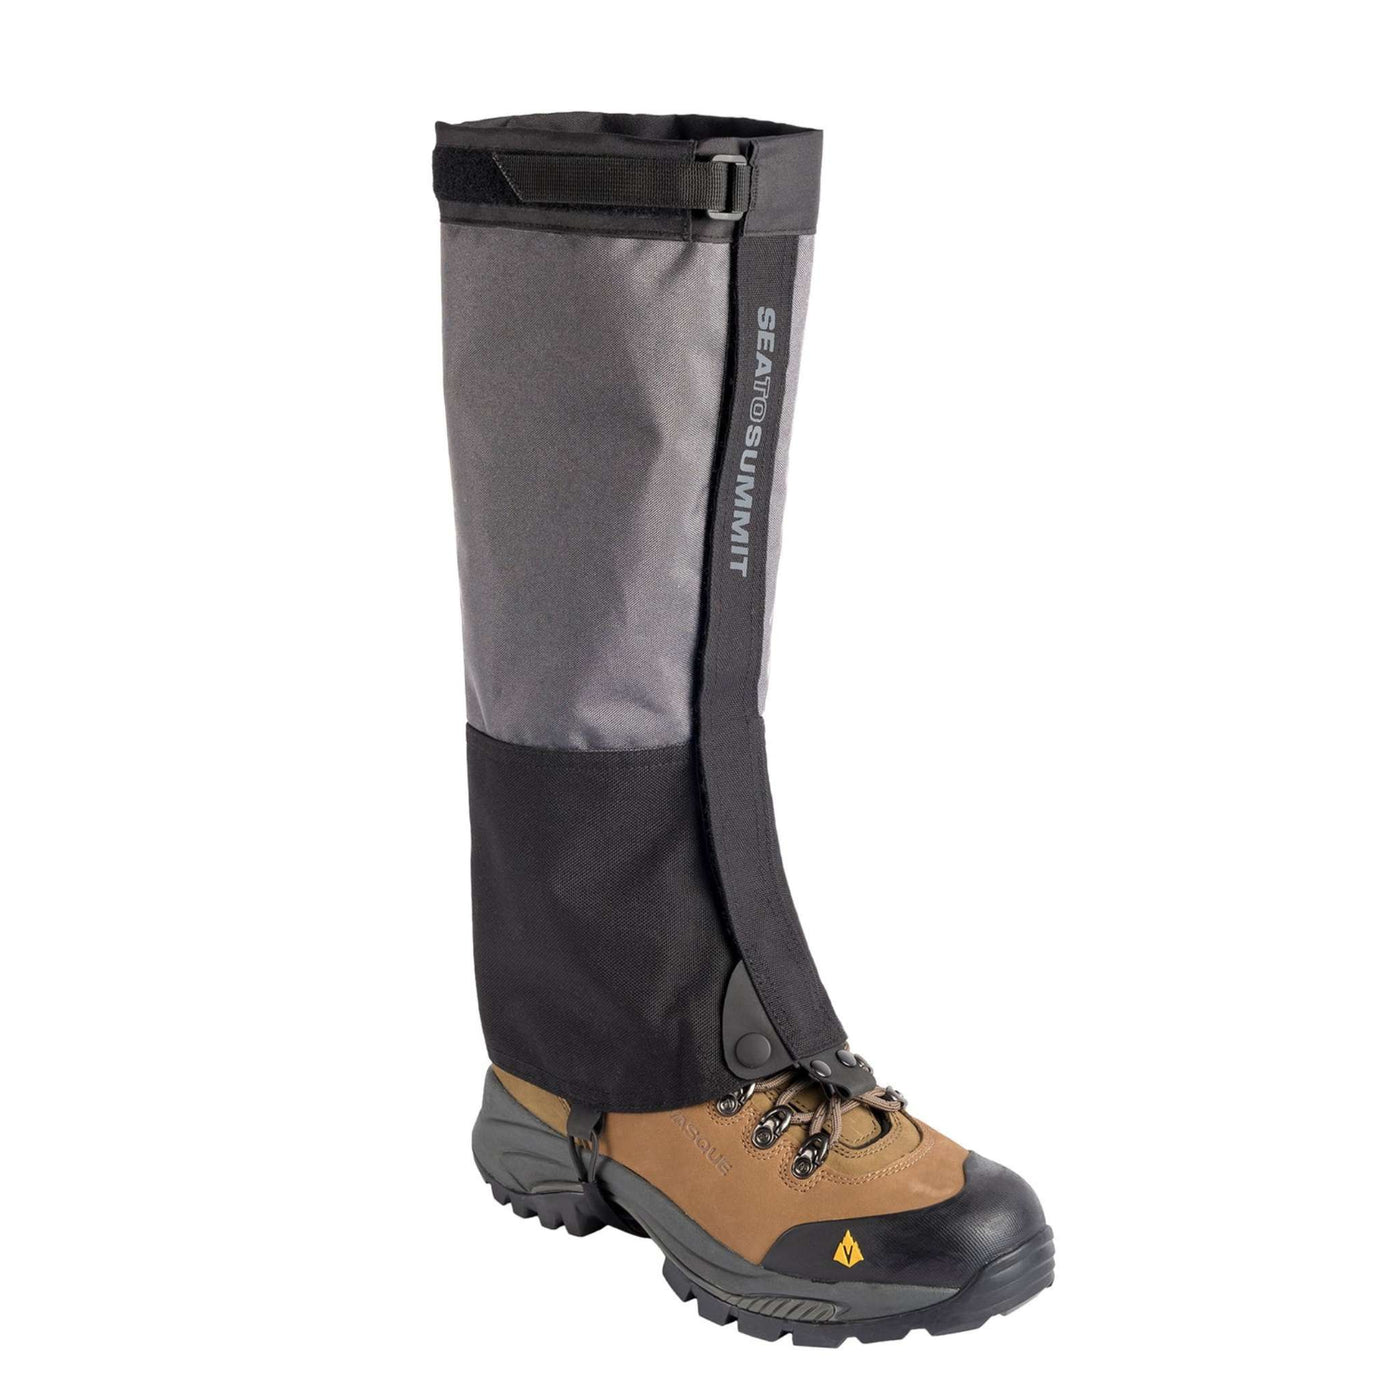 Sea to Summit Overland Gaiters | Backcountry NZ | Further Faster Christchurch NZ #black